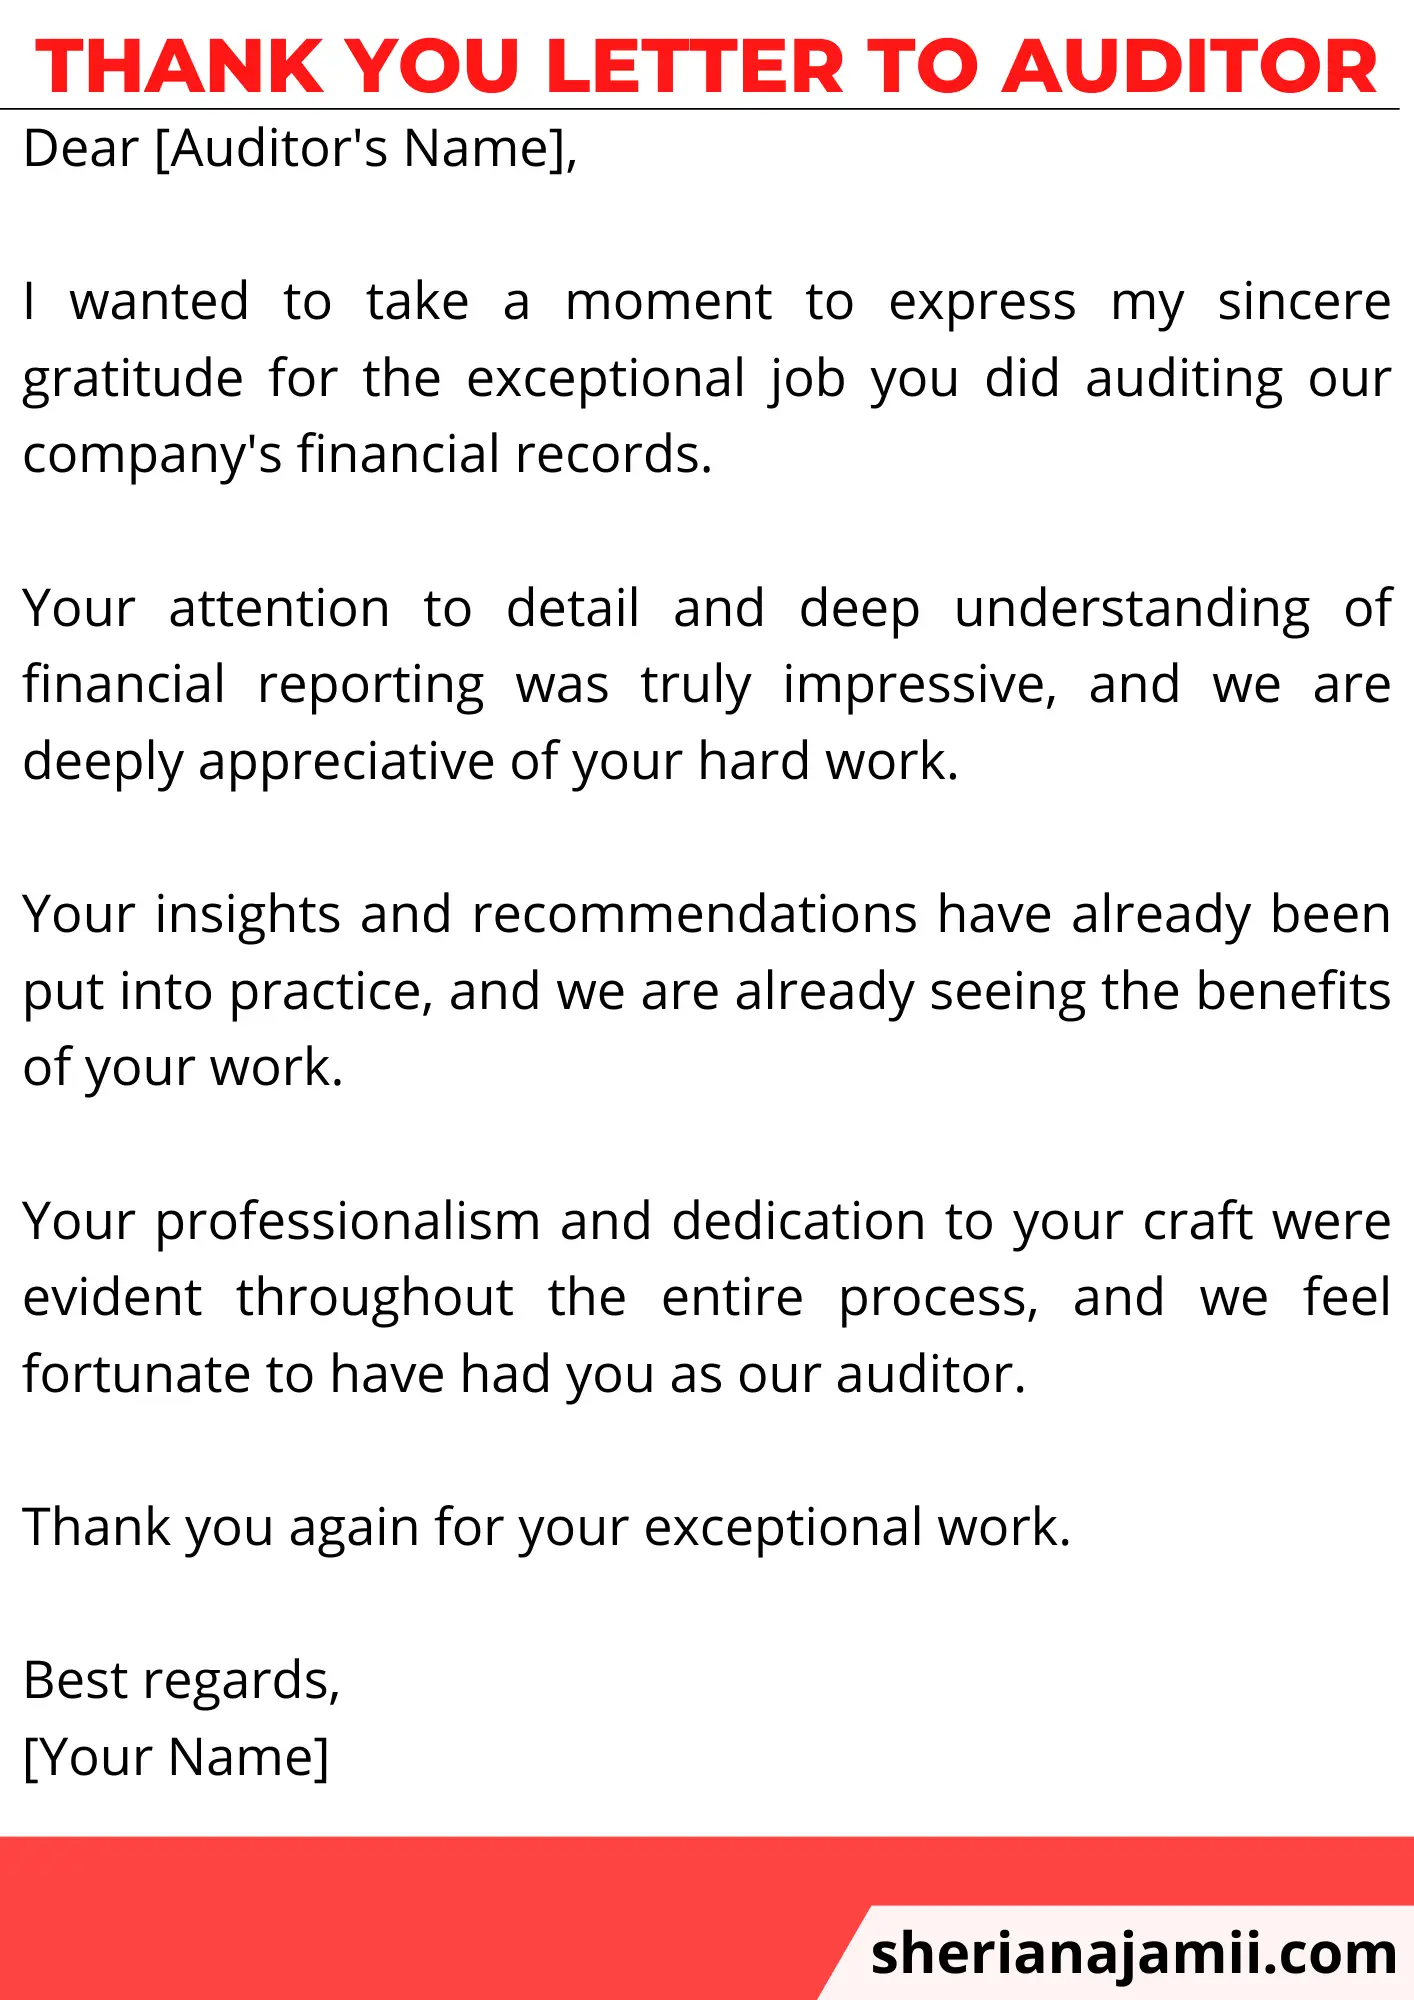 thank you letter to auditor, sample thank you letter to auditor